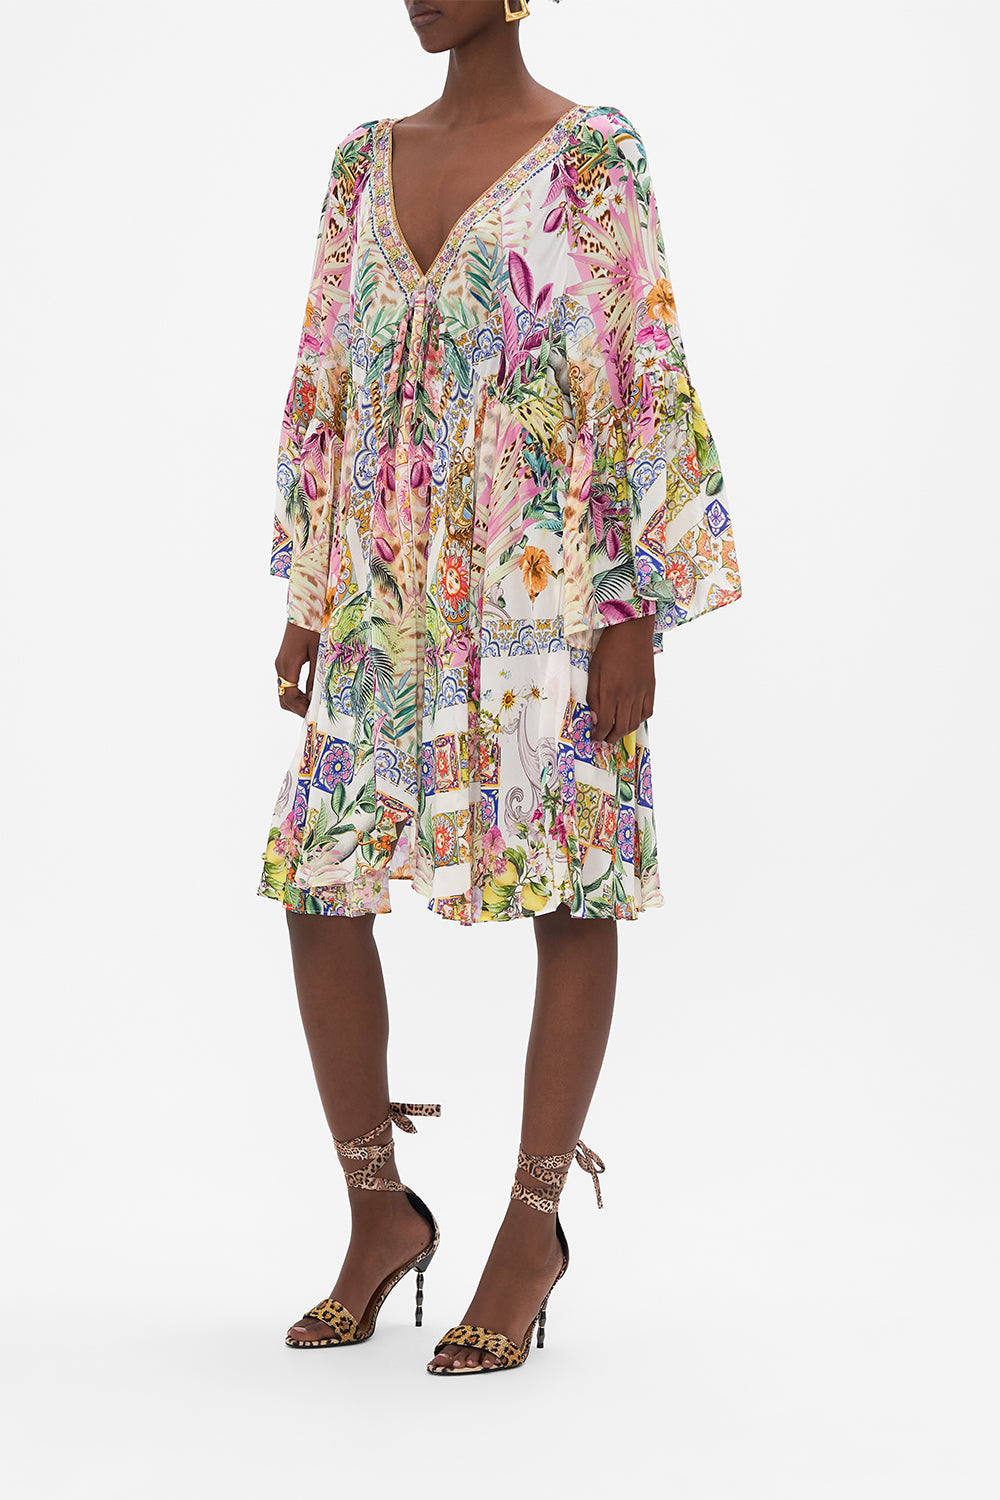 Side view of model wearing CAMILLA a line floral dress in Flowers Of Neptune print